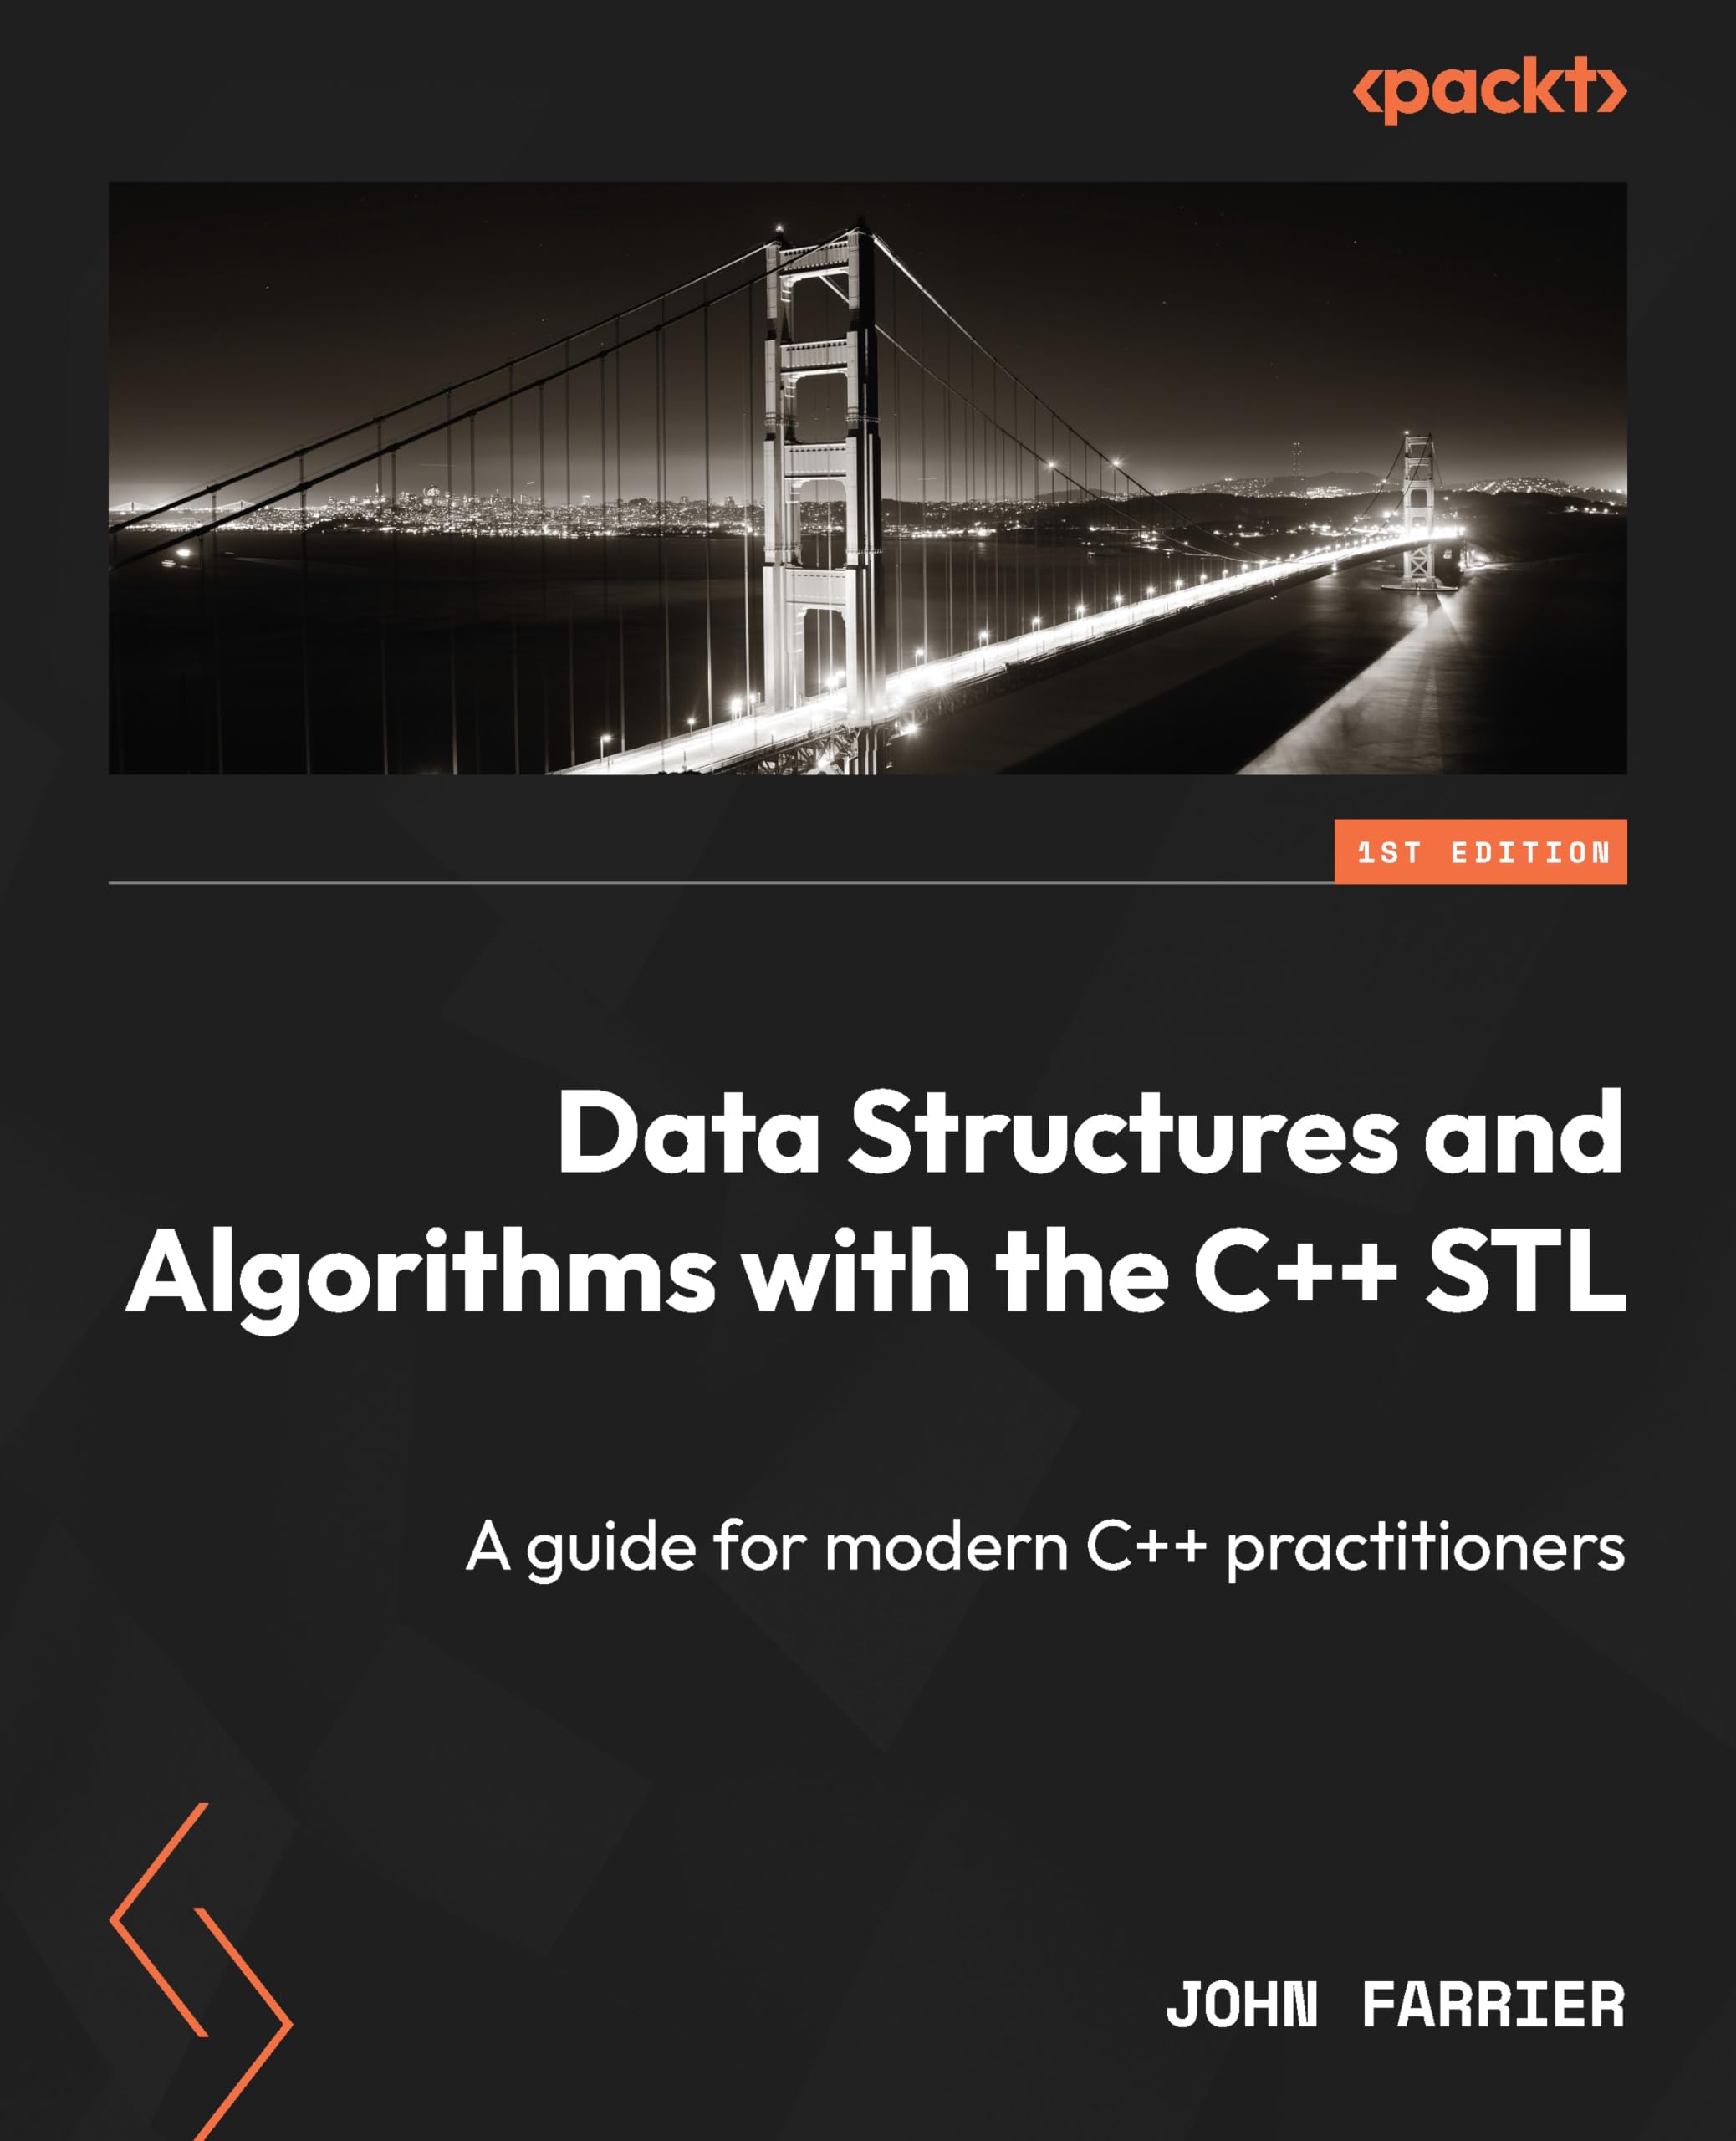 Data Structures and Algorithms with the C++ STL